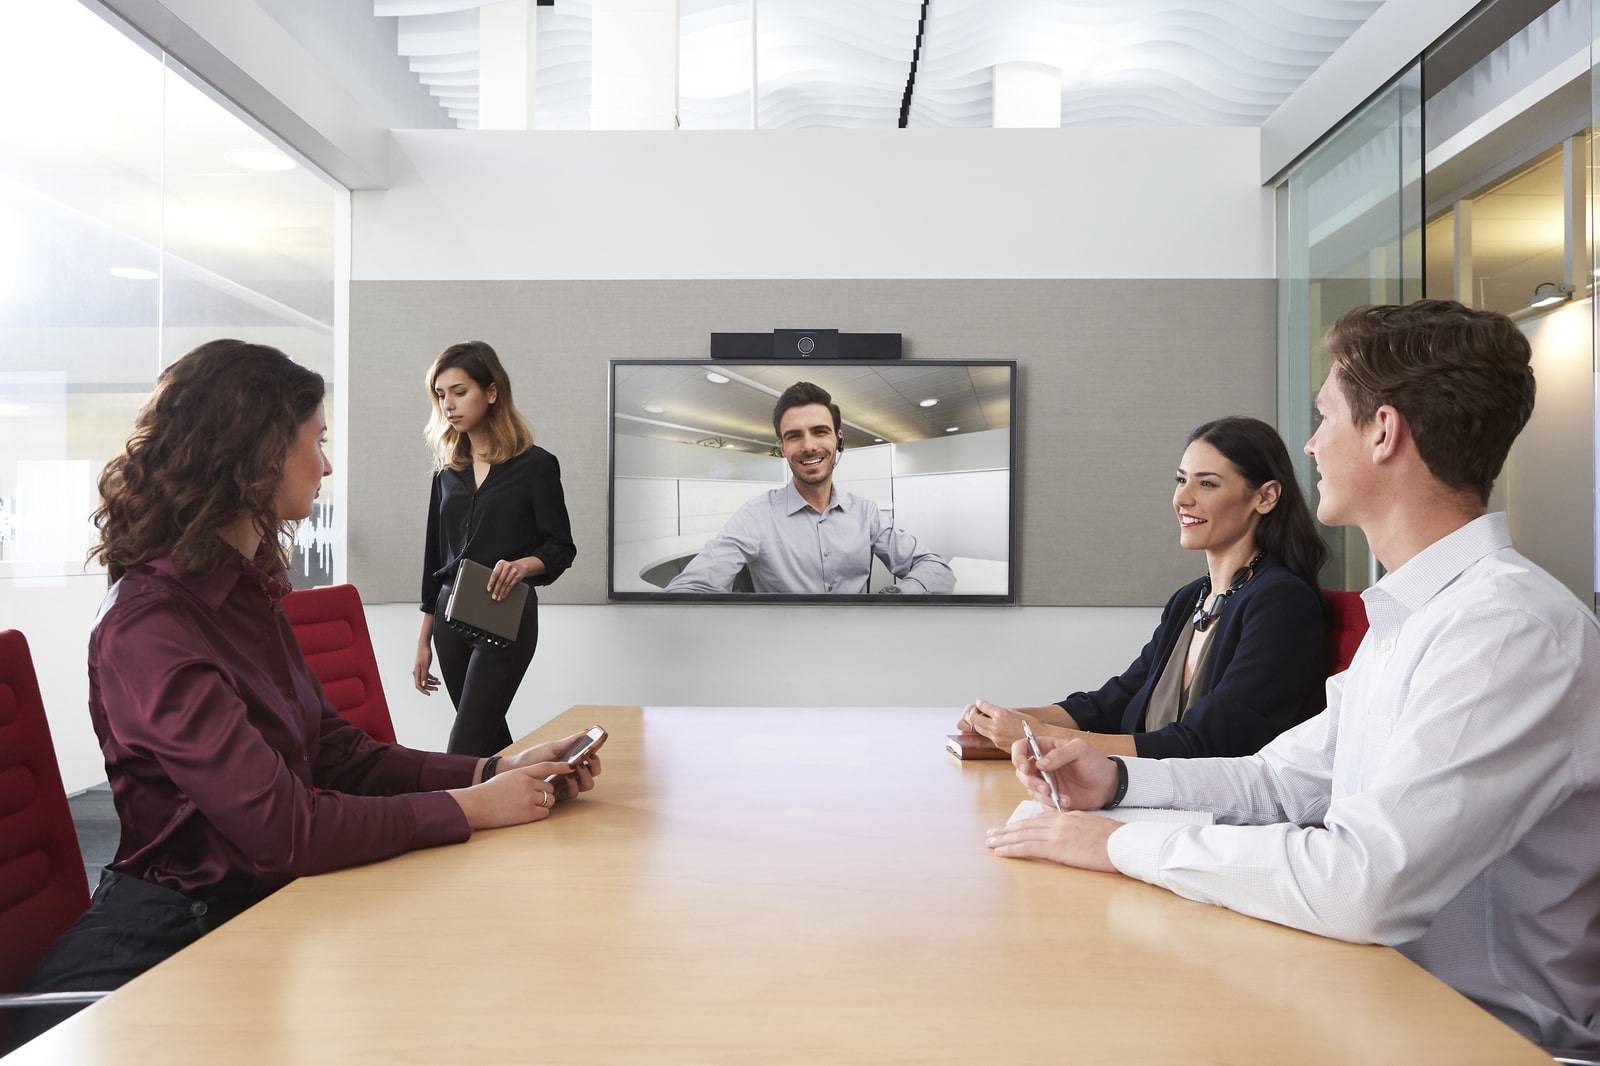 Polycom Studio: The #1 Video Conferencing Solution for Huddle Rooms